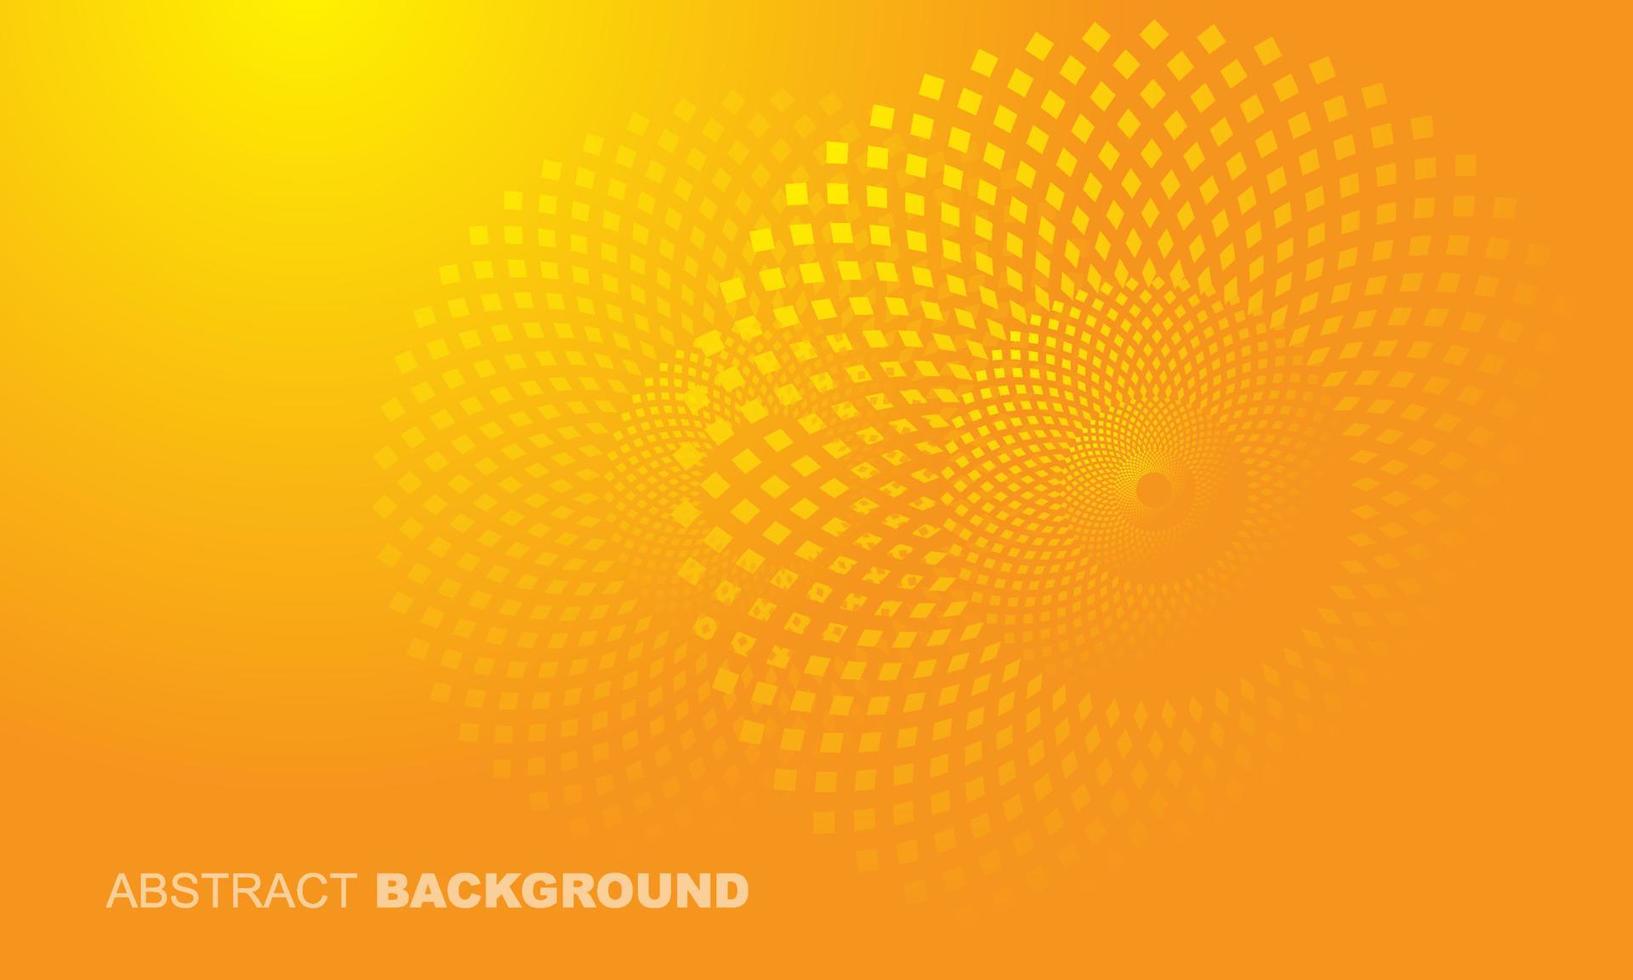 Vector of abstract circular pattern and background